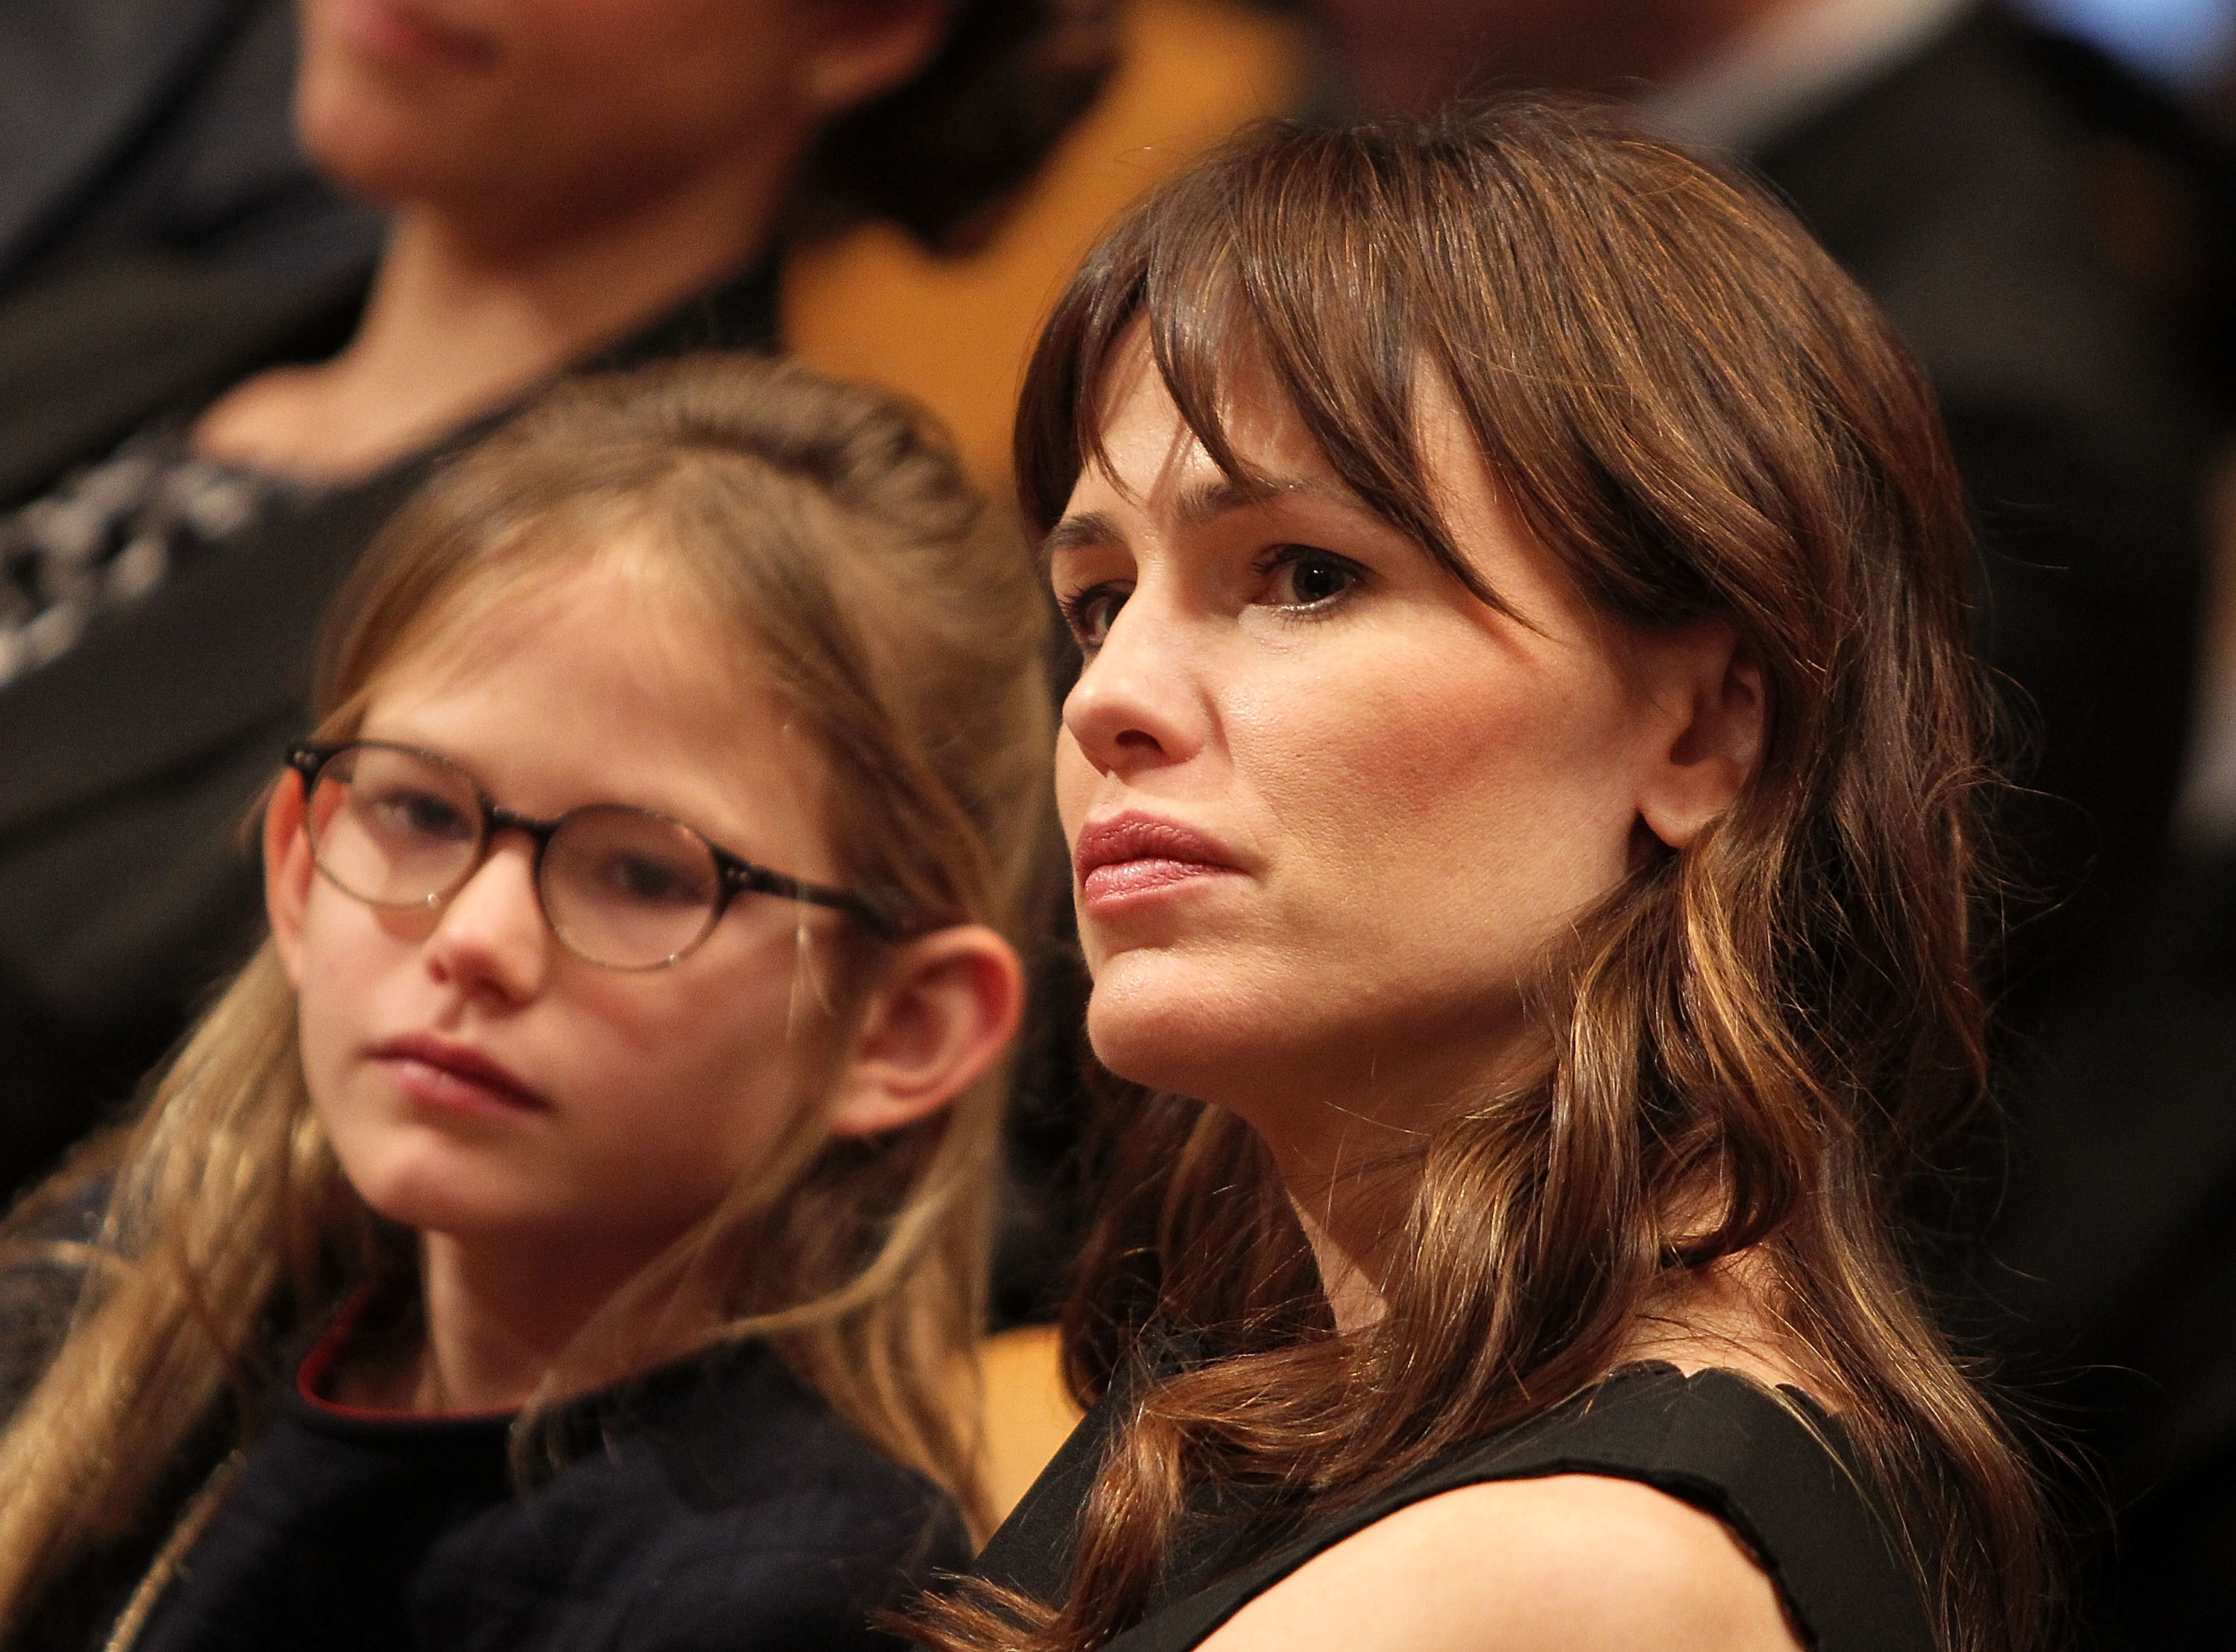 Jennifer Garner and her daughter Violet Affleck at a Senate Appropriations State, Foreign Operations, and Related Programs Subcommittee hearing on Capitol Hill in Washington on March 26, 2015 | Source: Getty Images